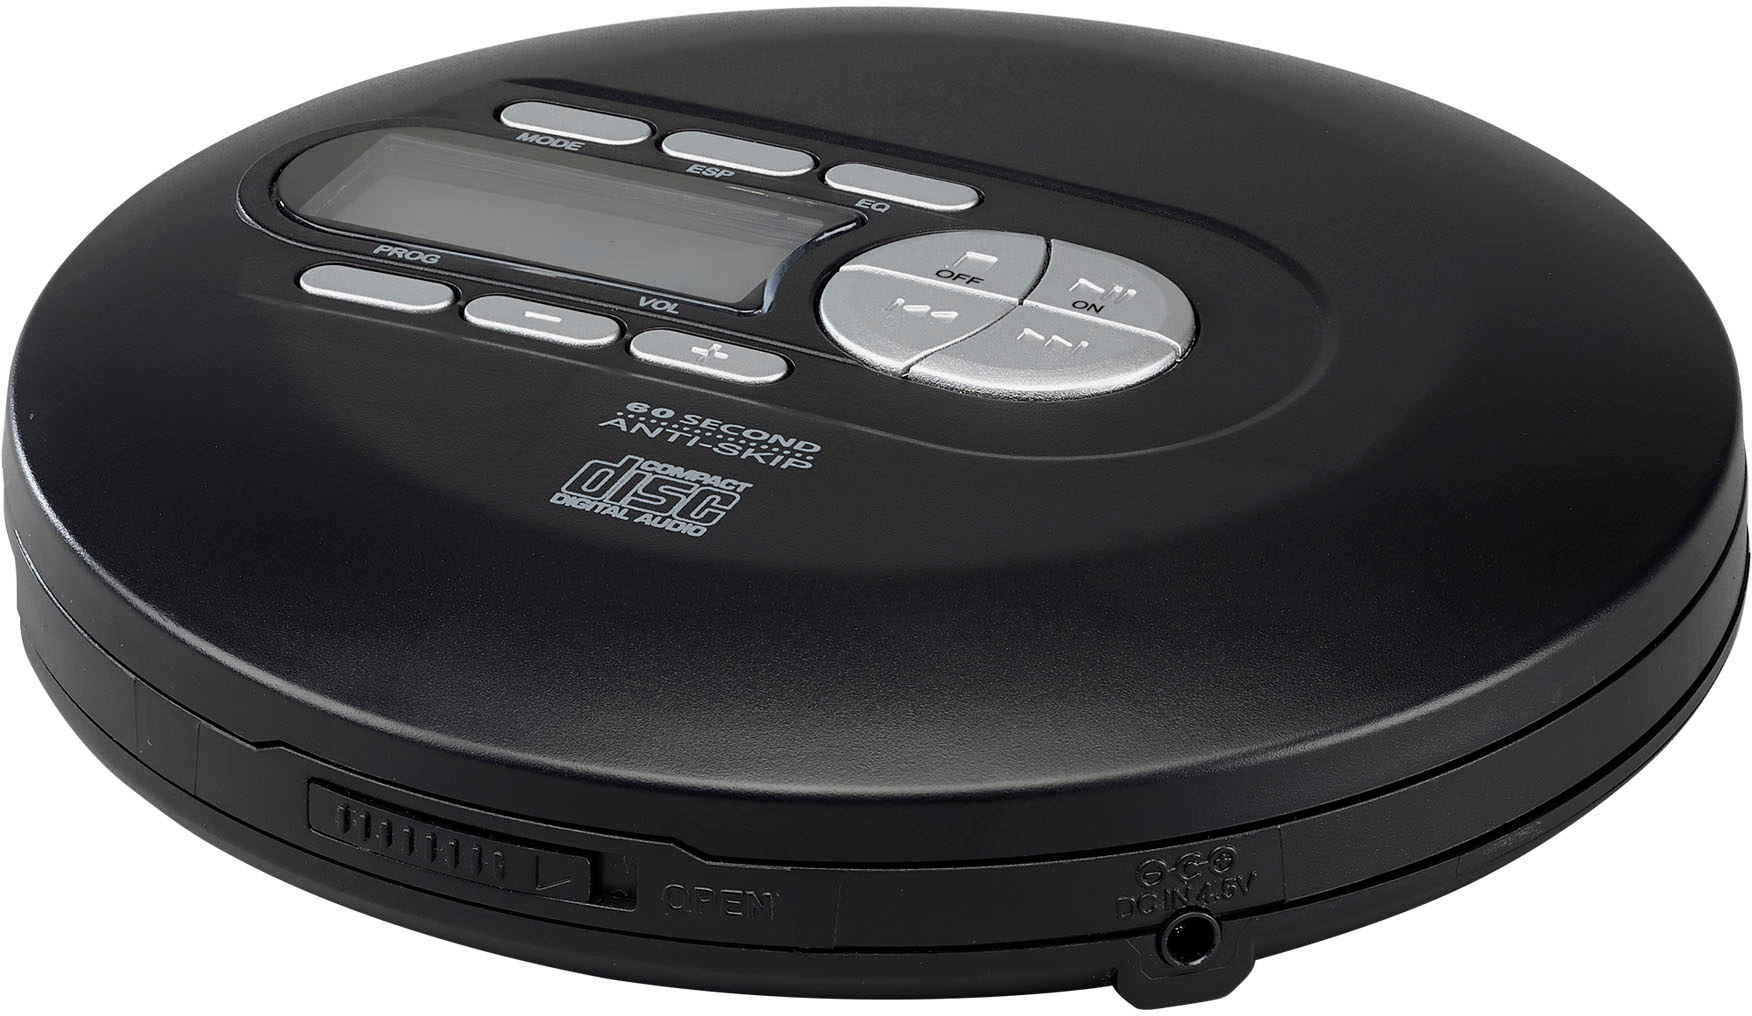 Studebaker Joggable Personal CD Player with Wireless FM